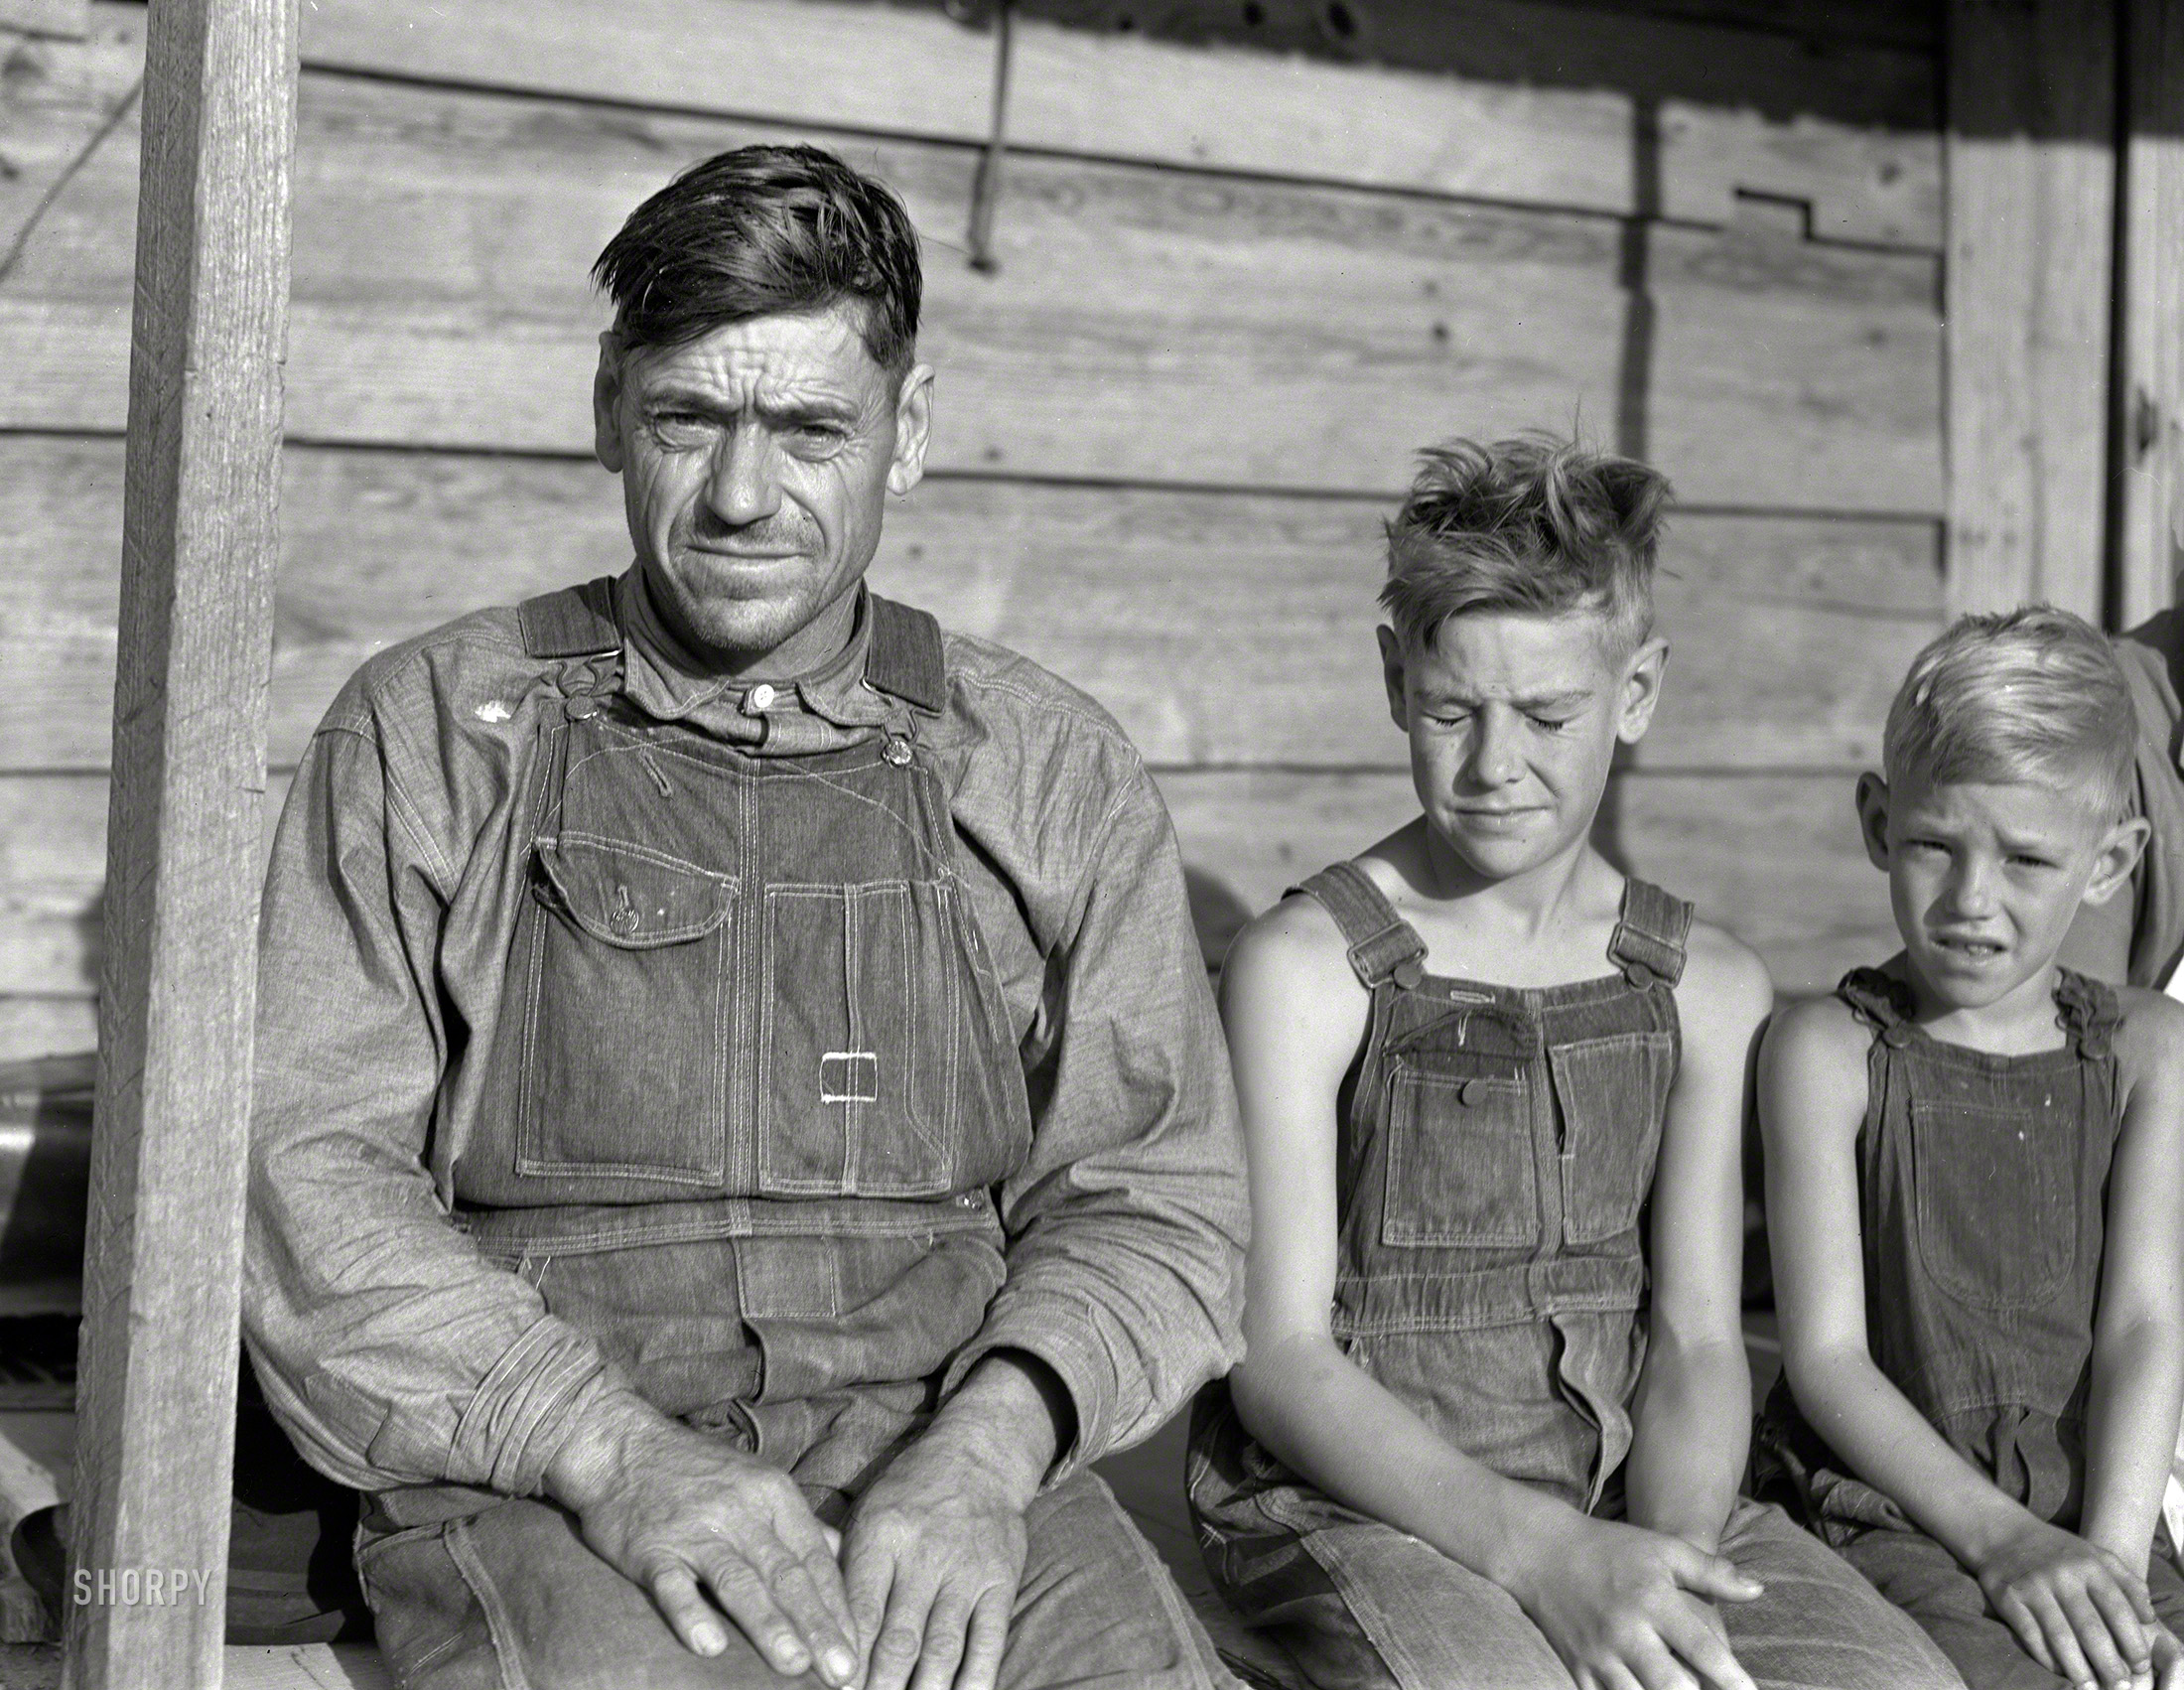 July 1937. "Landless sharecropper families. Sharecropper near Hartwell, Georgia." Photo by Dorothea Lange for the Resettlement Administration. View full size.